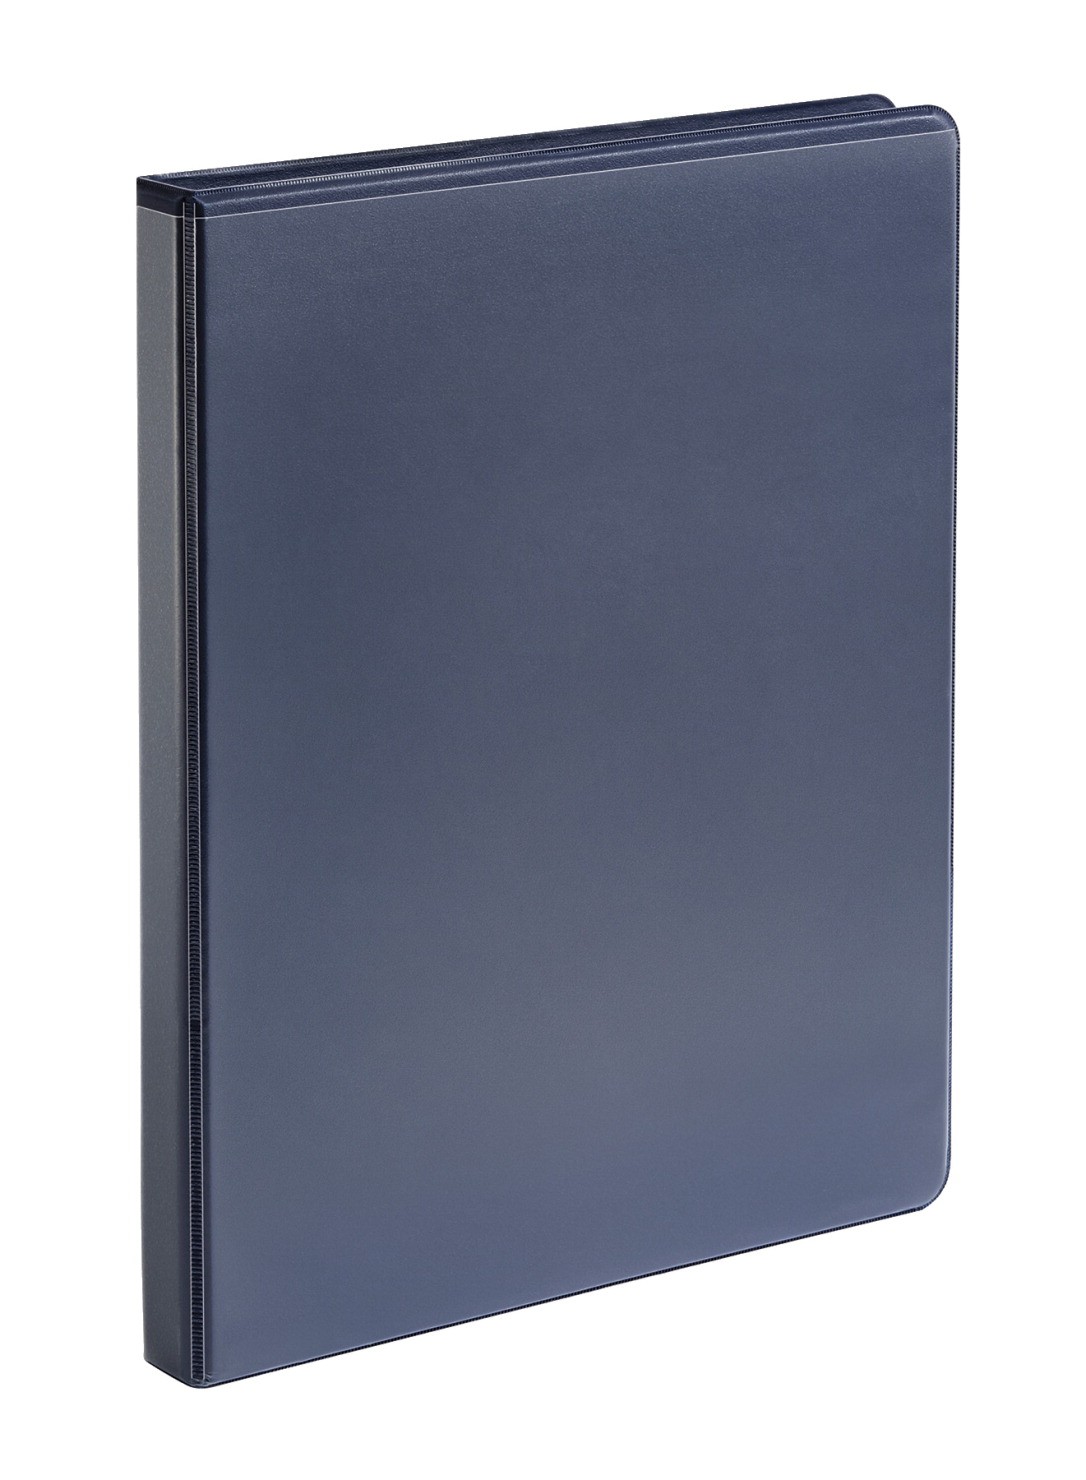 1/2" Clear View Binder, 8-1/2 X 11, 3 Ring, Blue